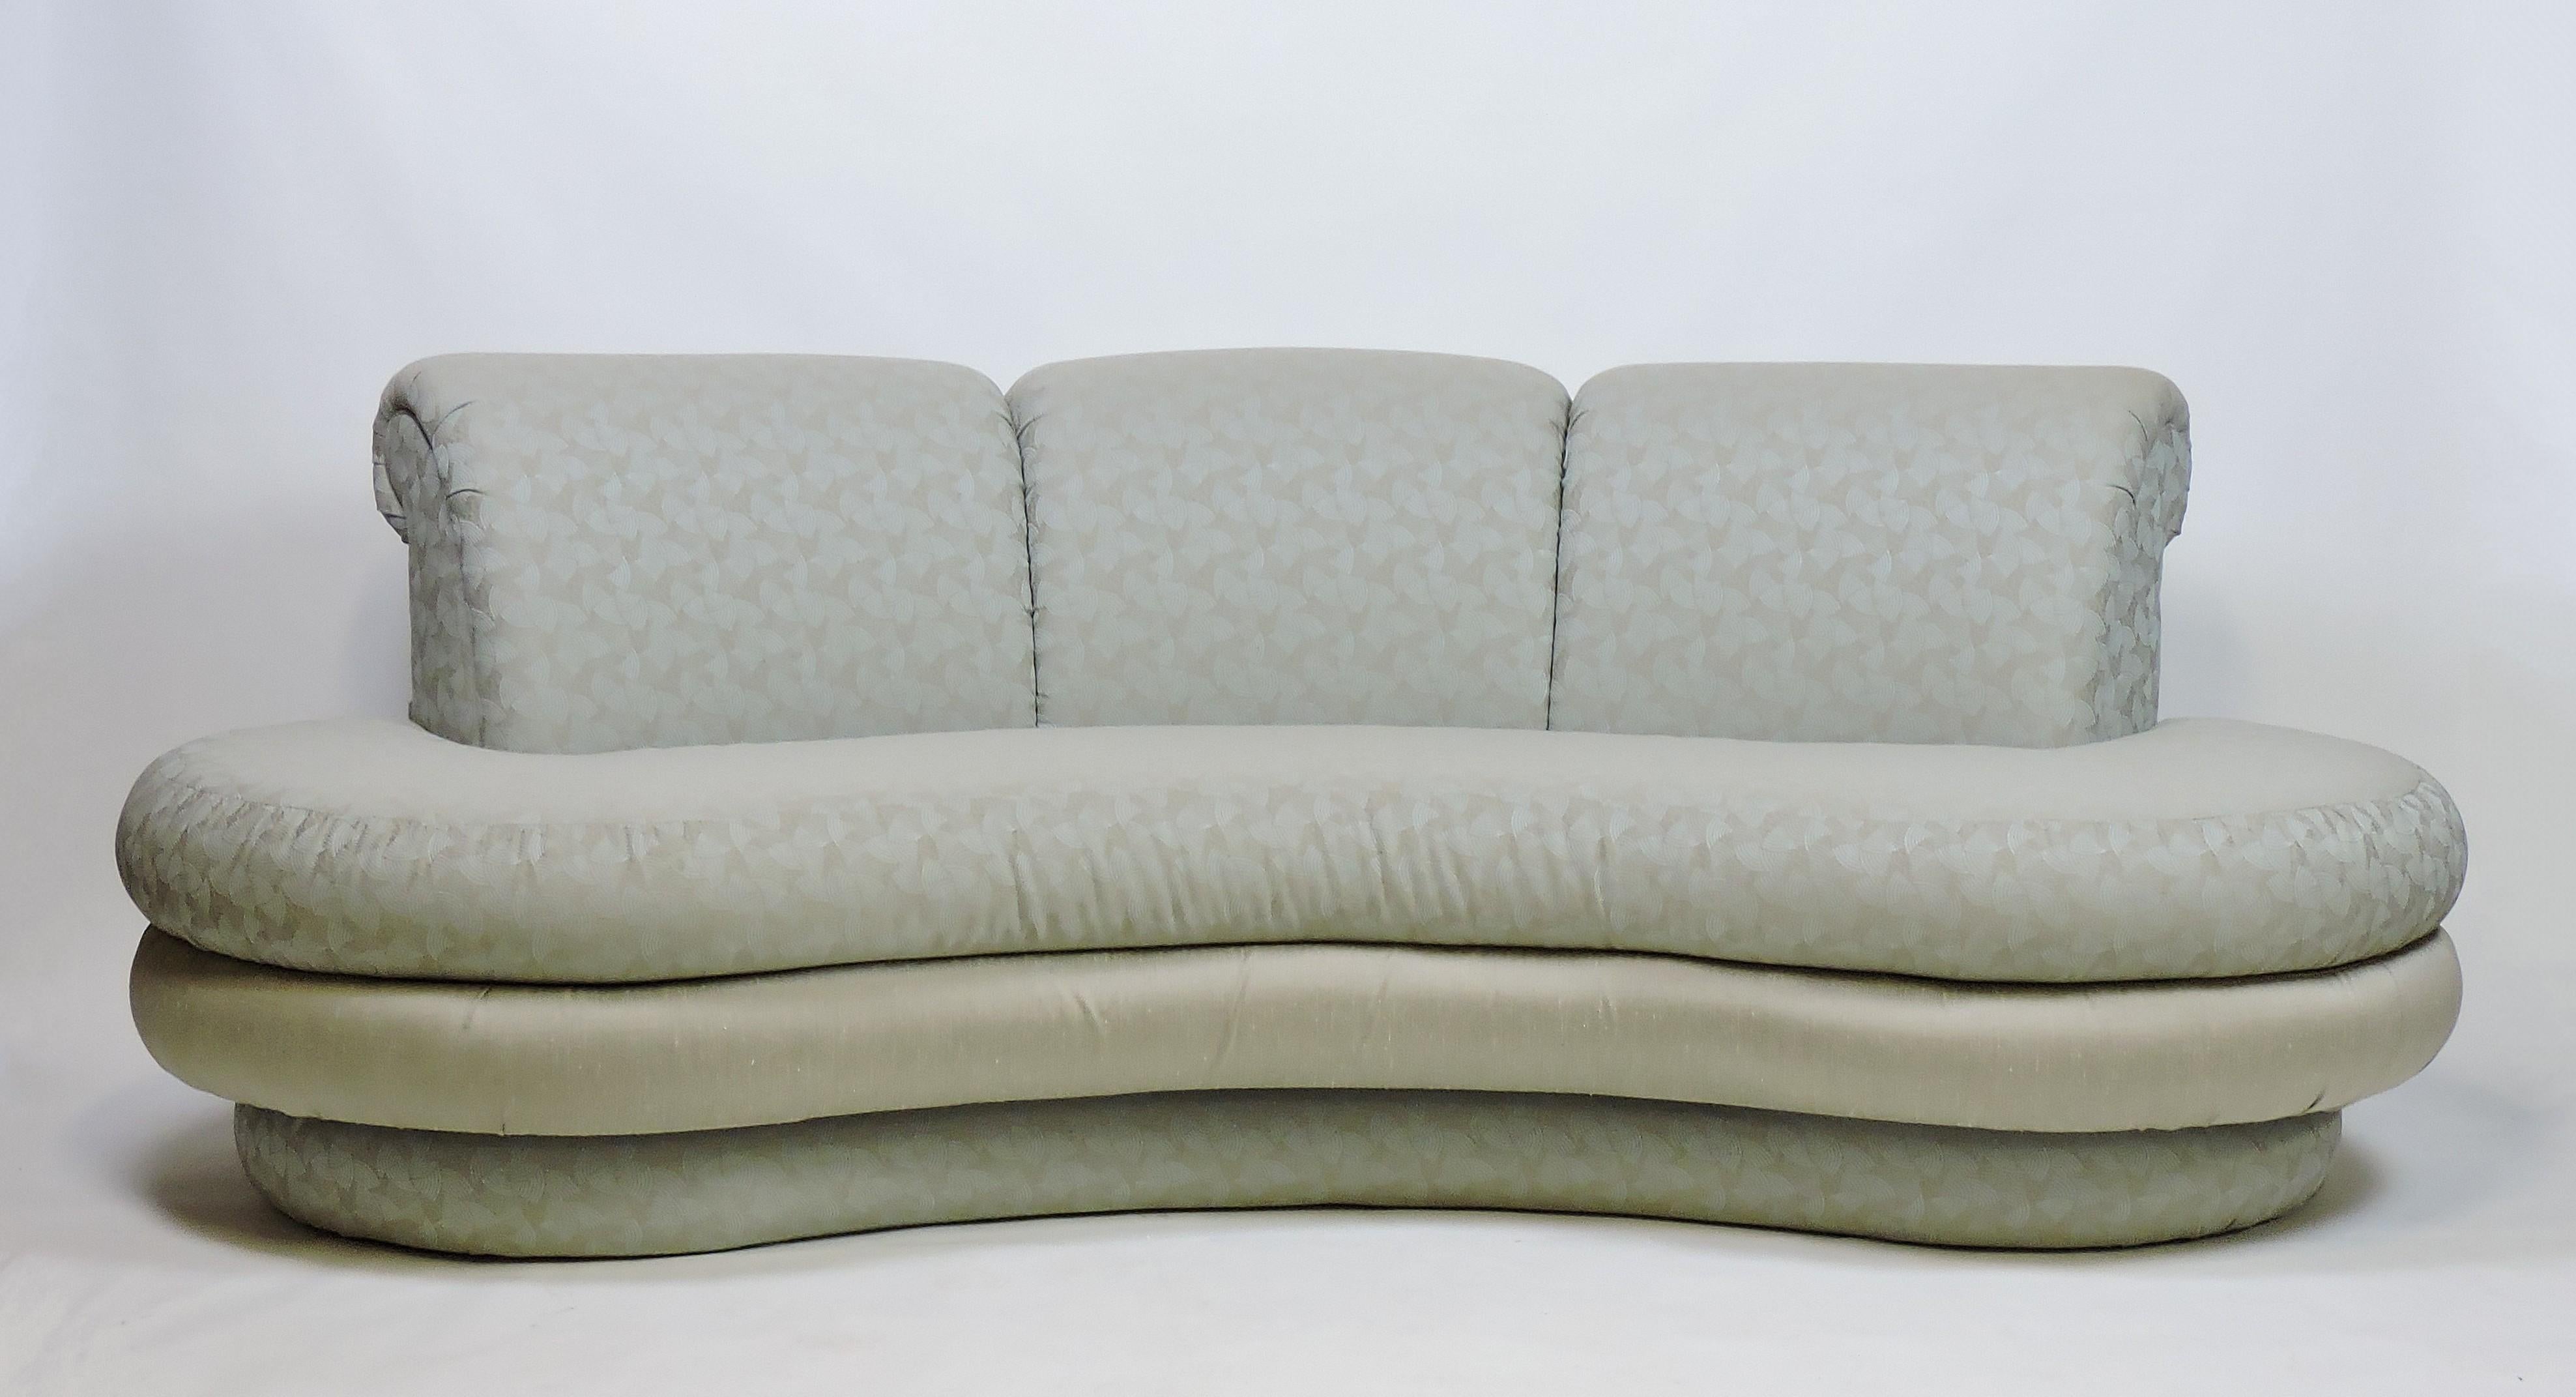 Wonderful pair of kidney shaped sofas designed by Adrian Pearsall and made by Comfort Designs. These sofas have a beautiful curvaceous and sculptural design and the original two-toned high quality upholstery.
 